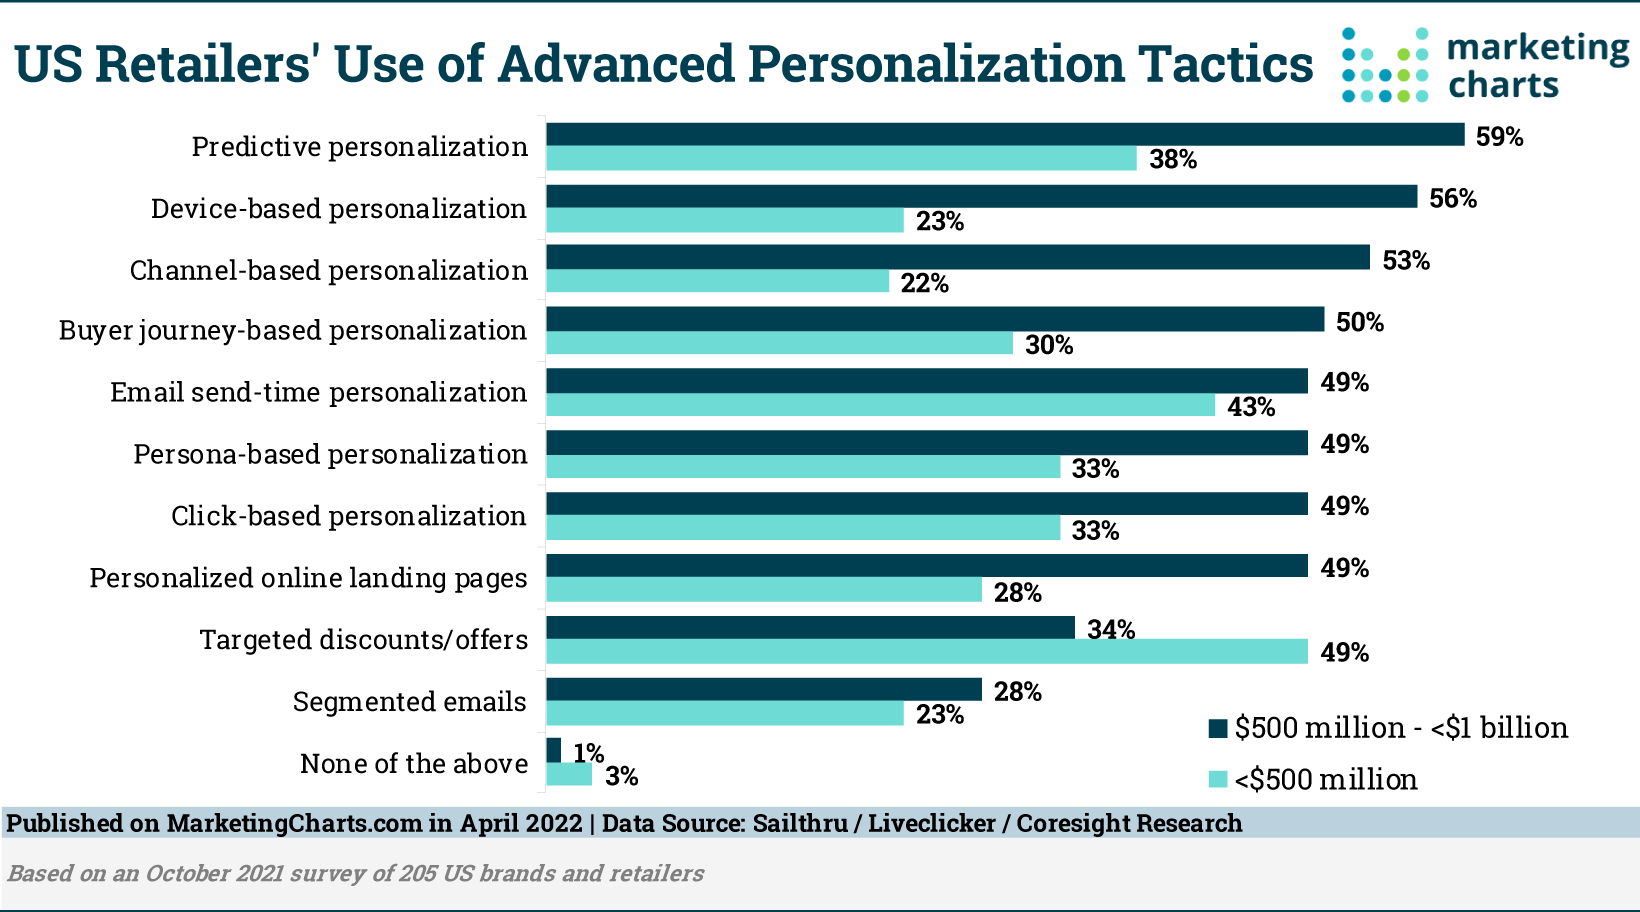 Graphic image showing US retailers' use of personalization tactics